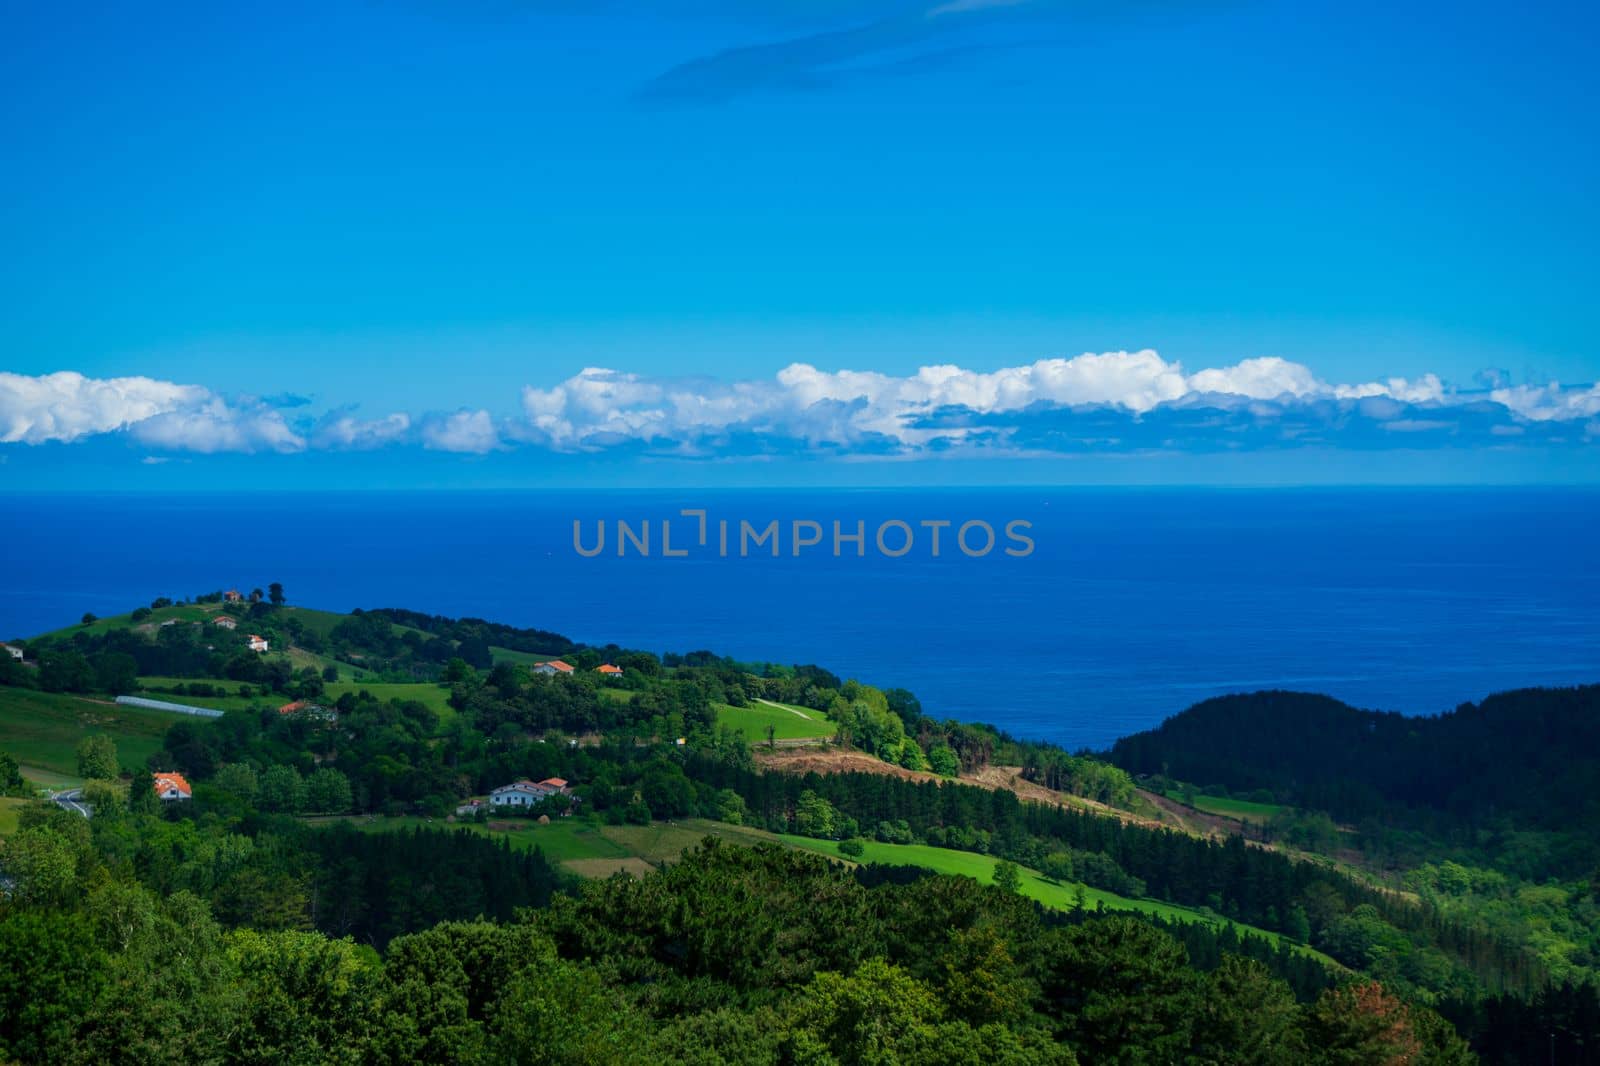 Landscape overlooking green hills and Atlantic Ocean. Coast of Basque Country, Spain